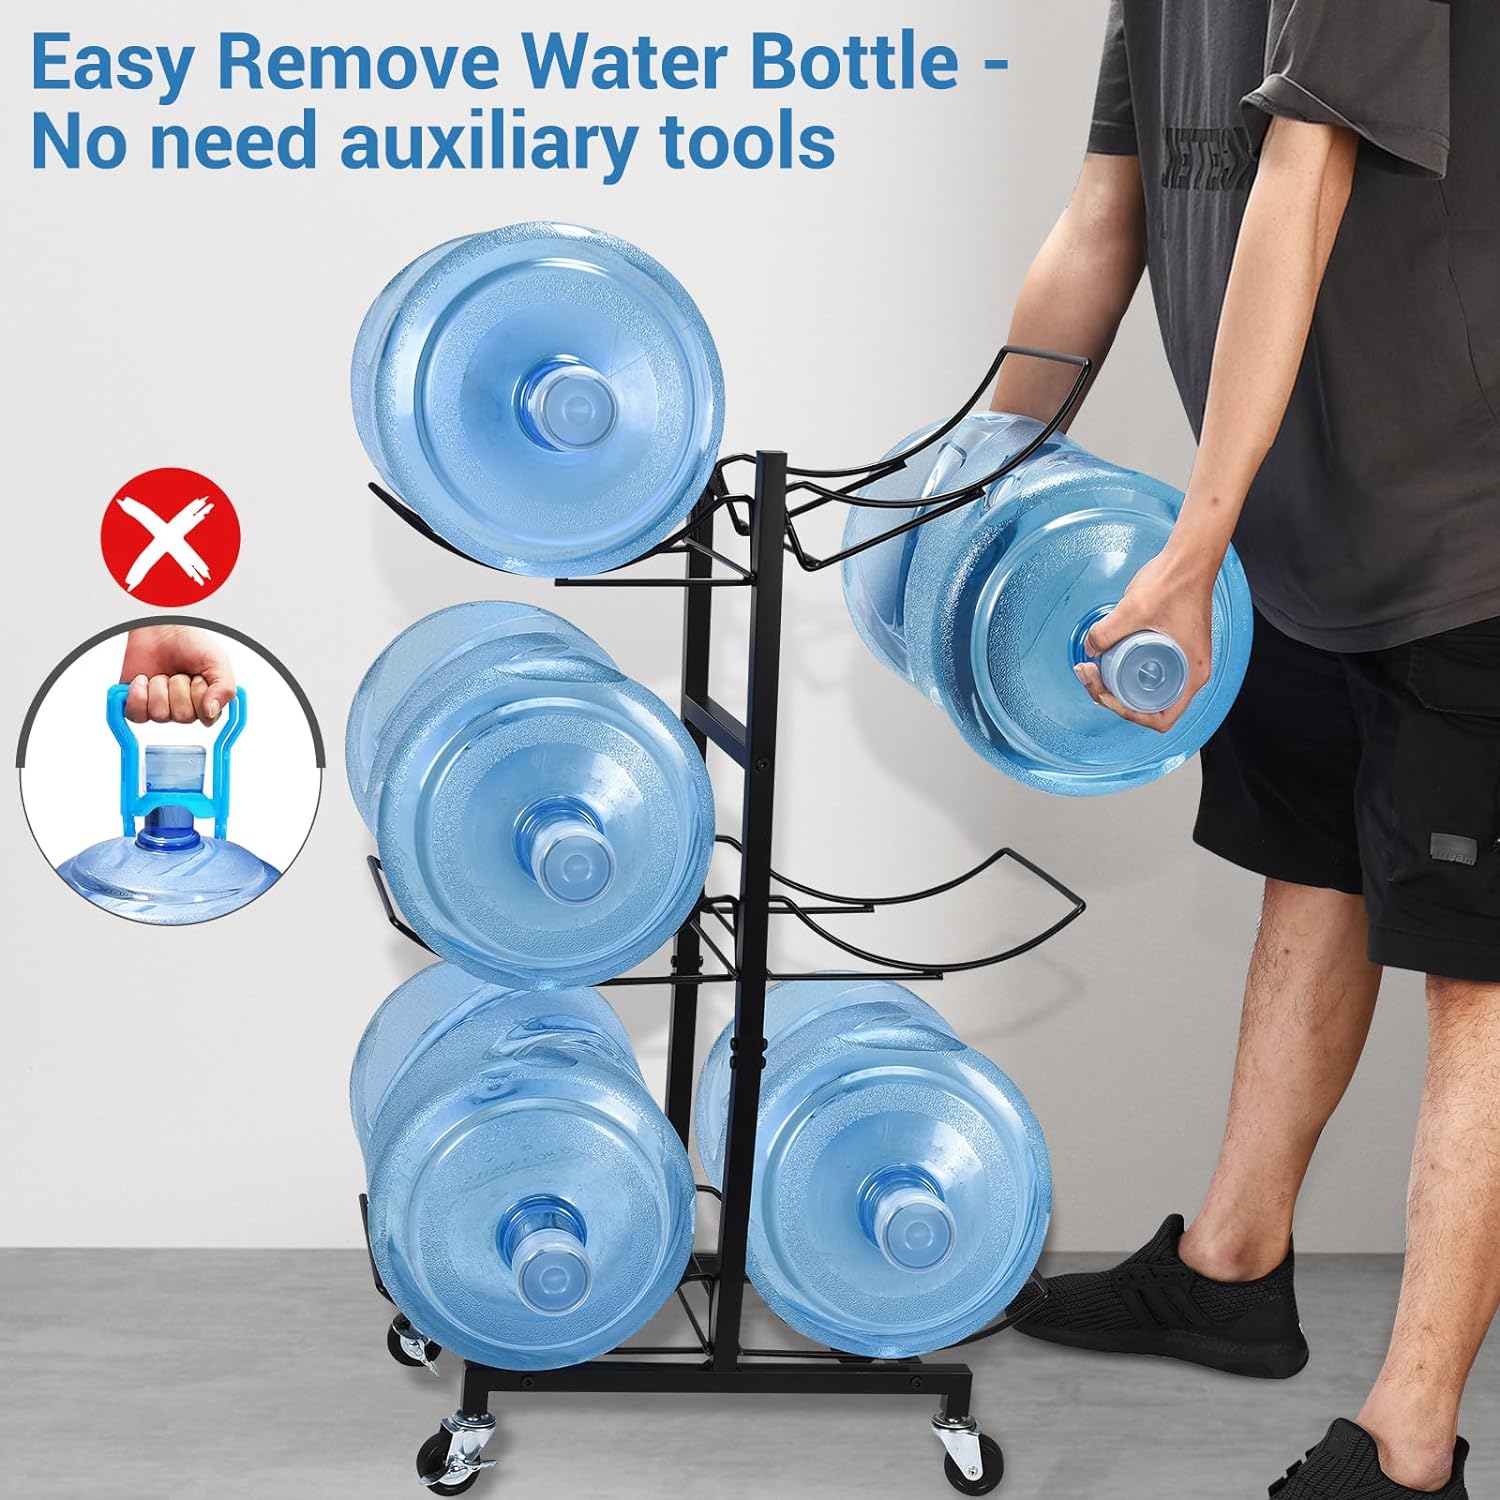 CAROD 5 Gallon Water Bottle Holder, Heavy Duty Foldable Water Jug Stand 3-Tier Movable 5 Gallon Water Jug Holder Water Cooler Jug Rack with 4 Wheels for 6 Bottles, Black